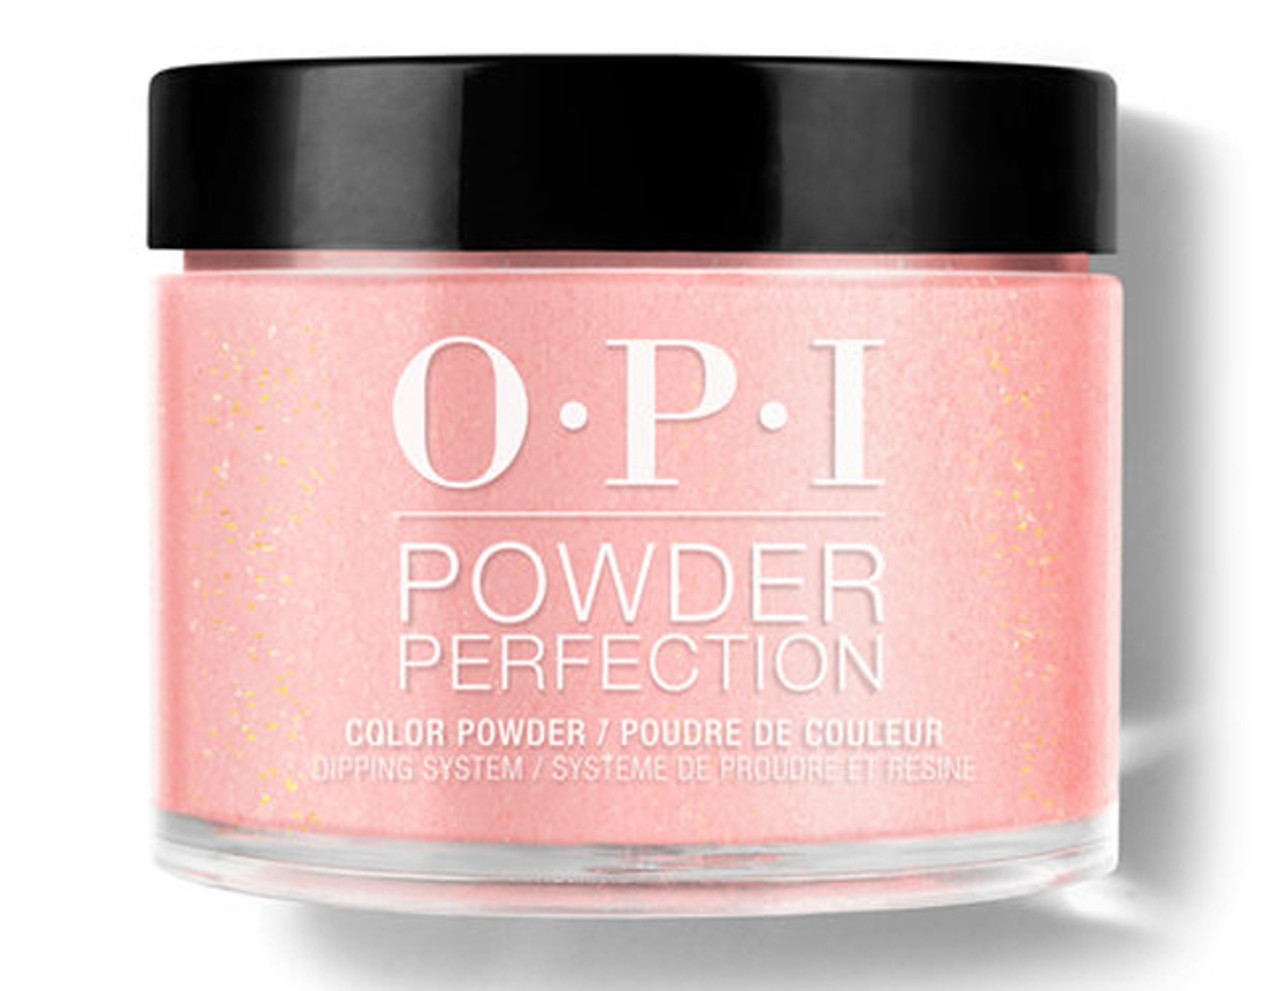 OPI Dipping Powder Perfection Mural Mural on the Wall - 1.5 oz / 43 G